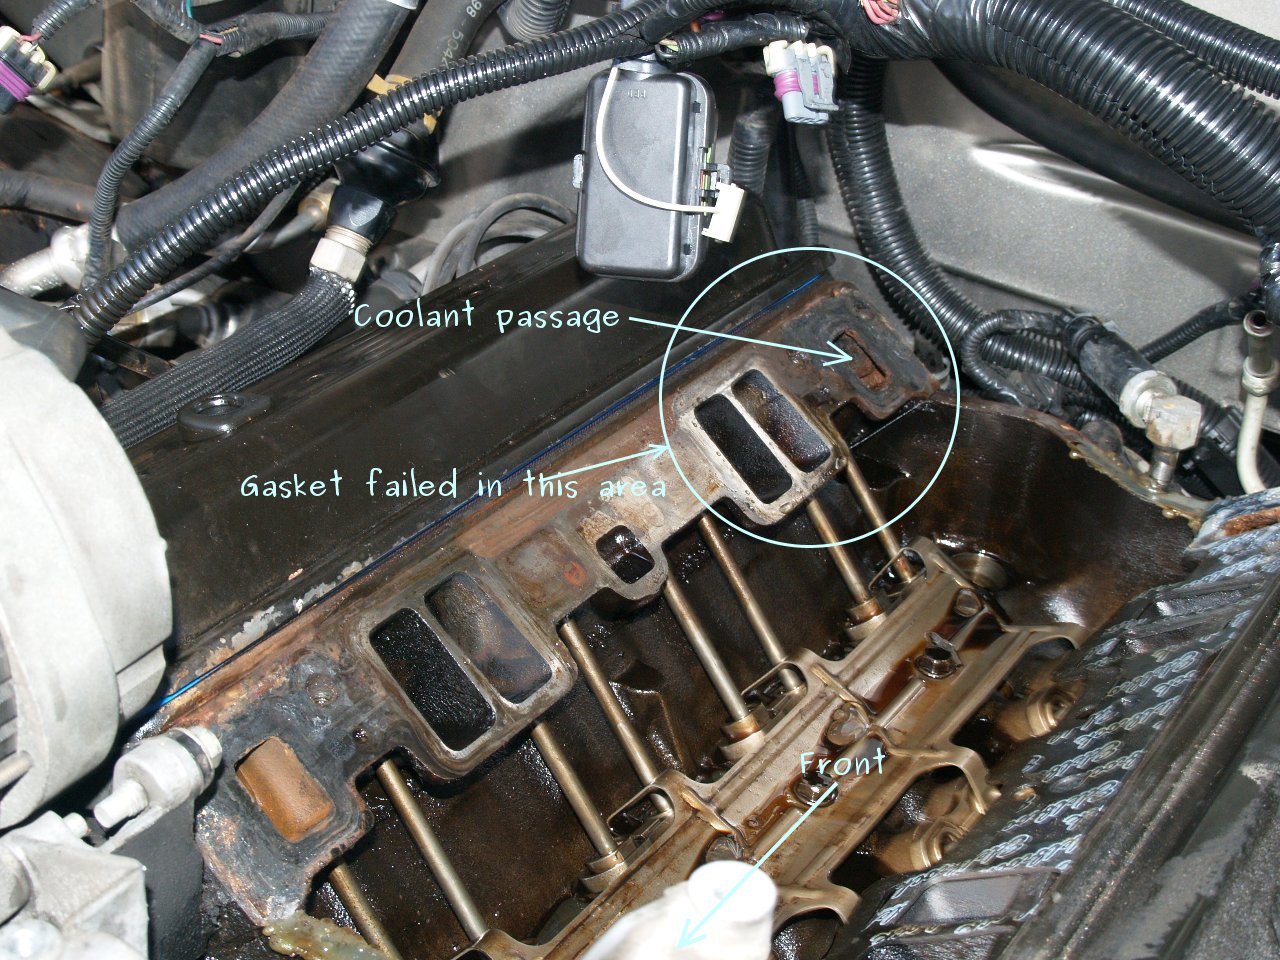 See B3305 in engine